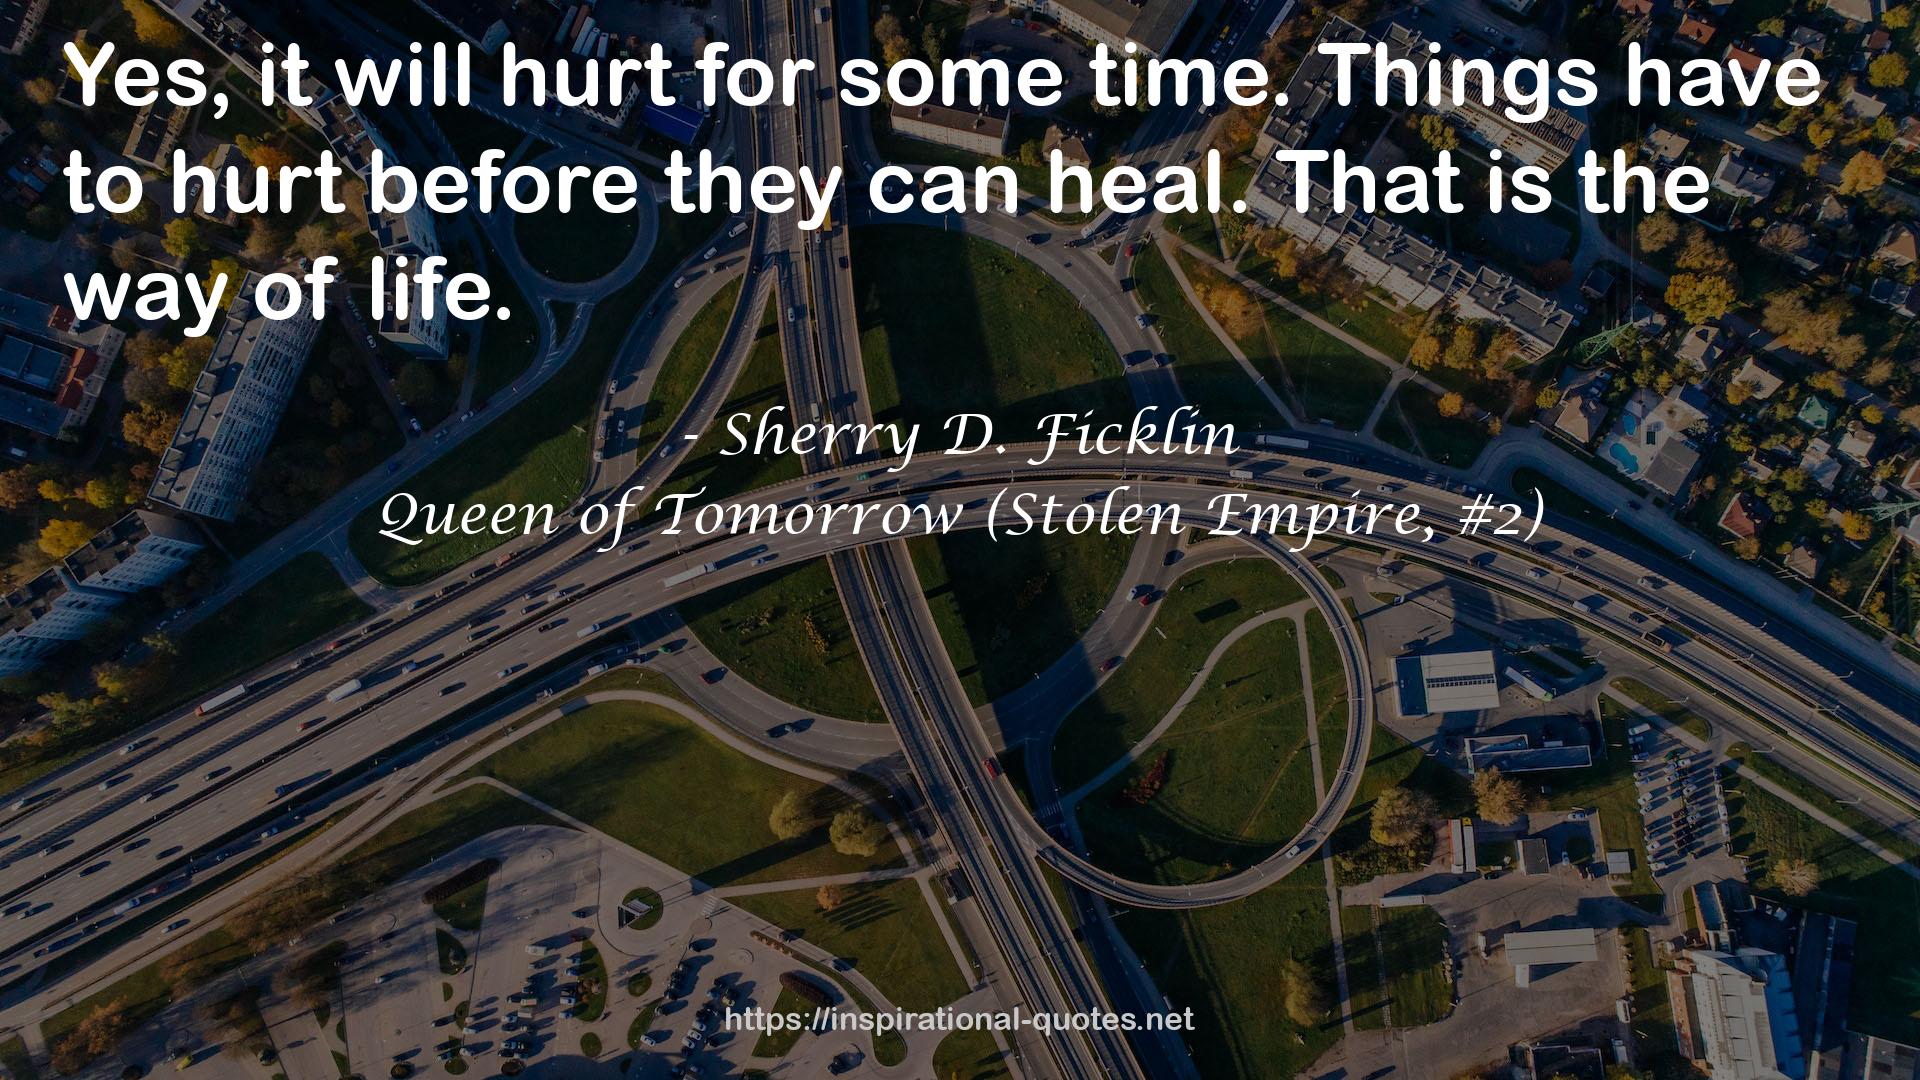 Sherry D. Ficklin QUOTES